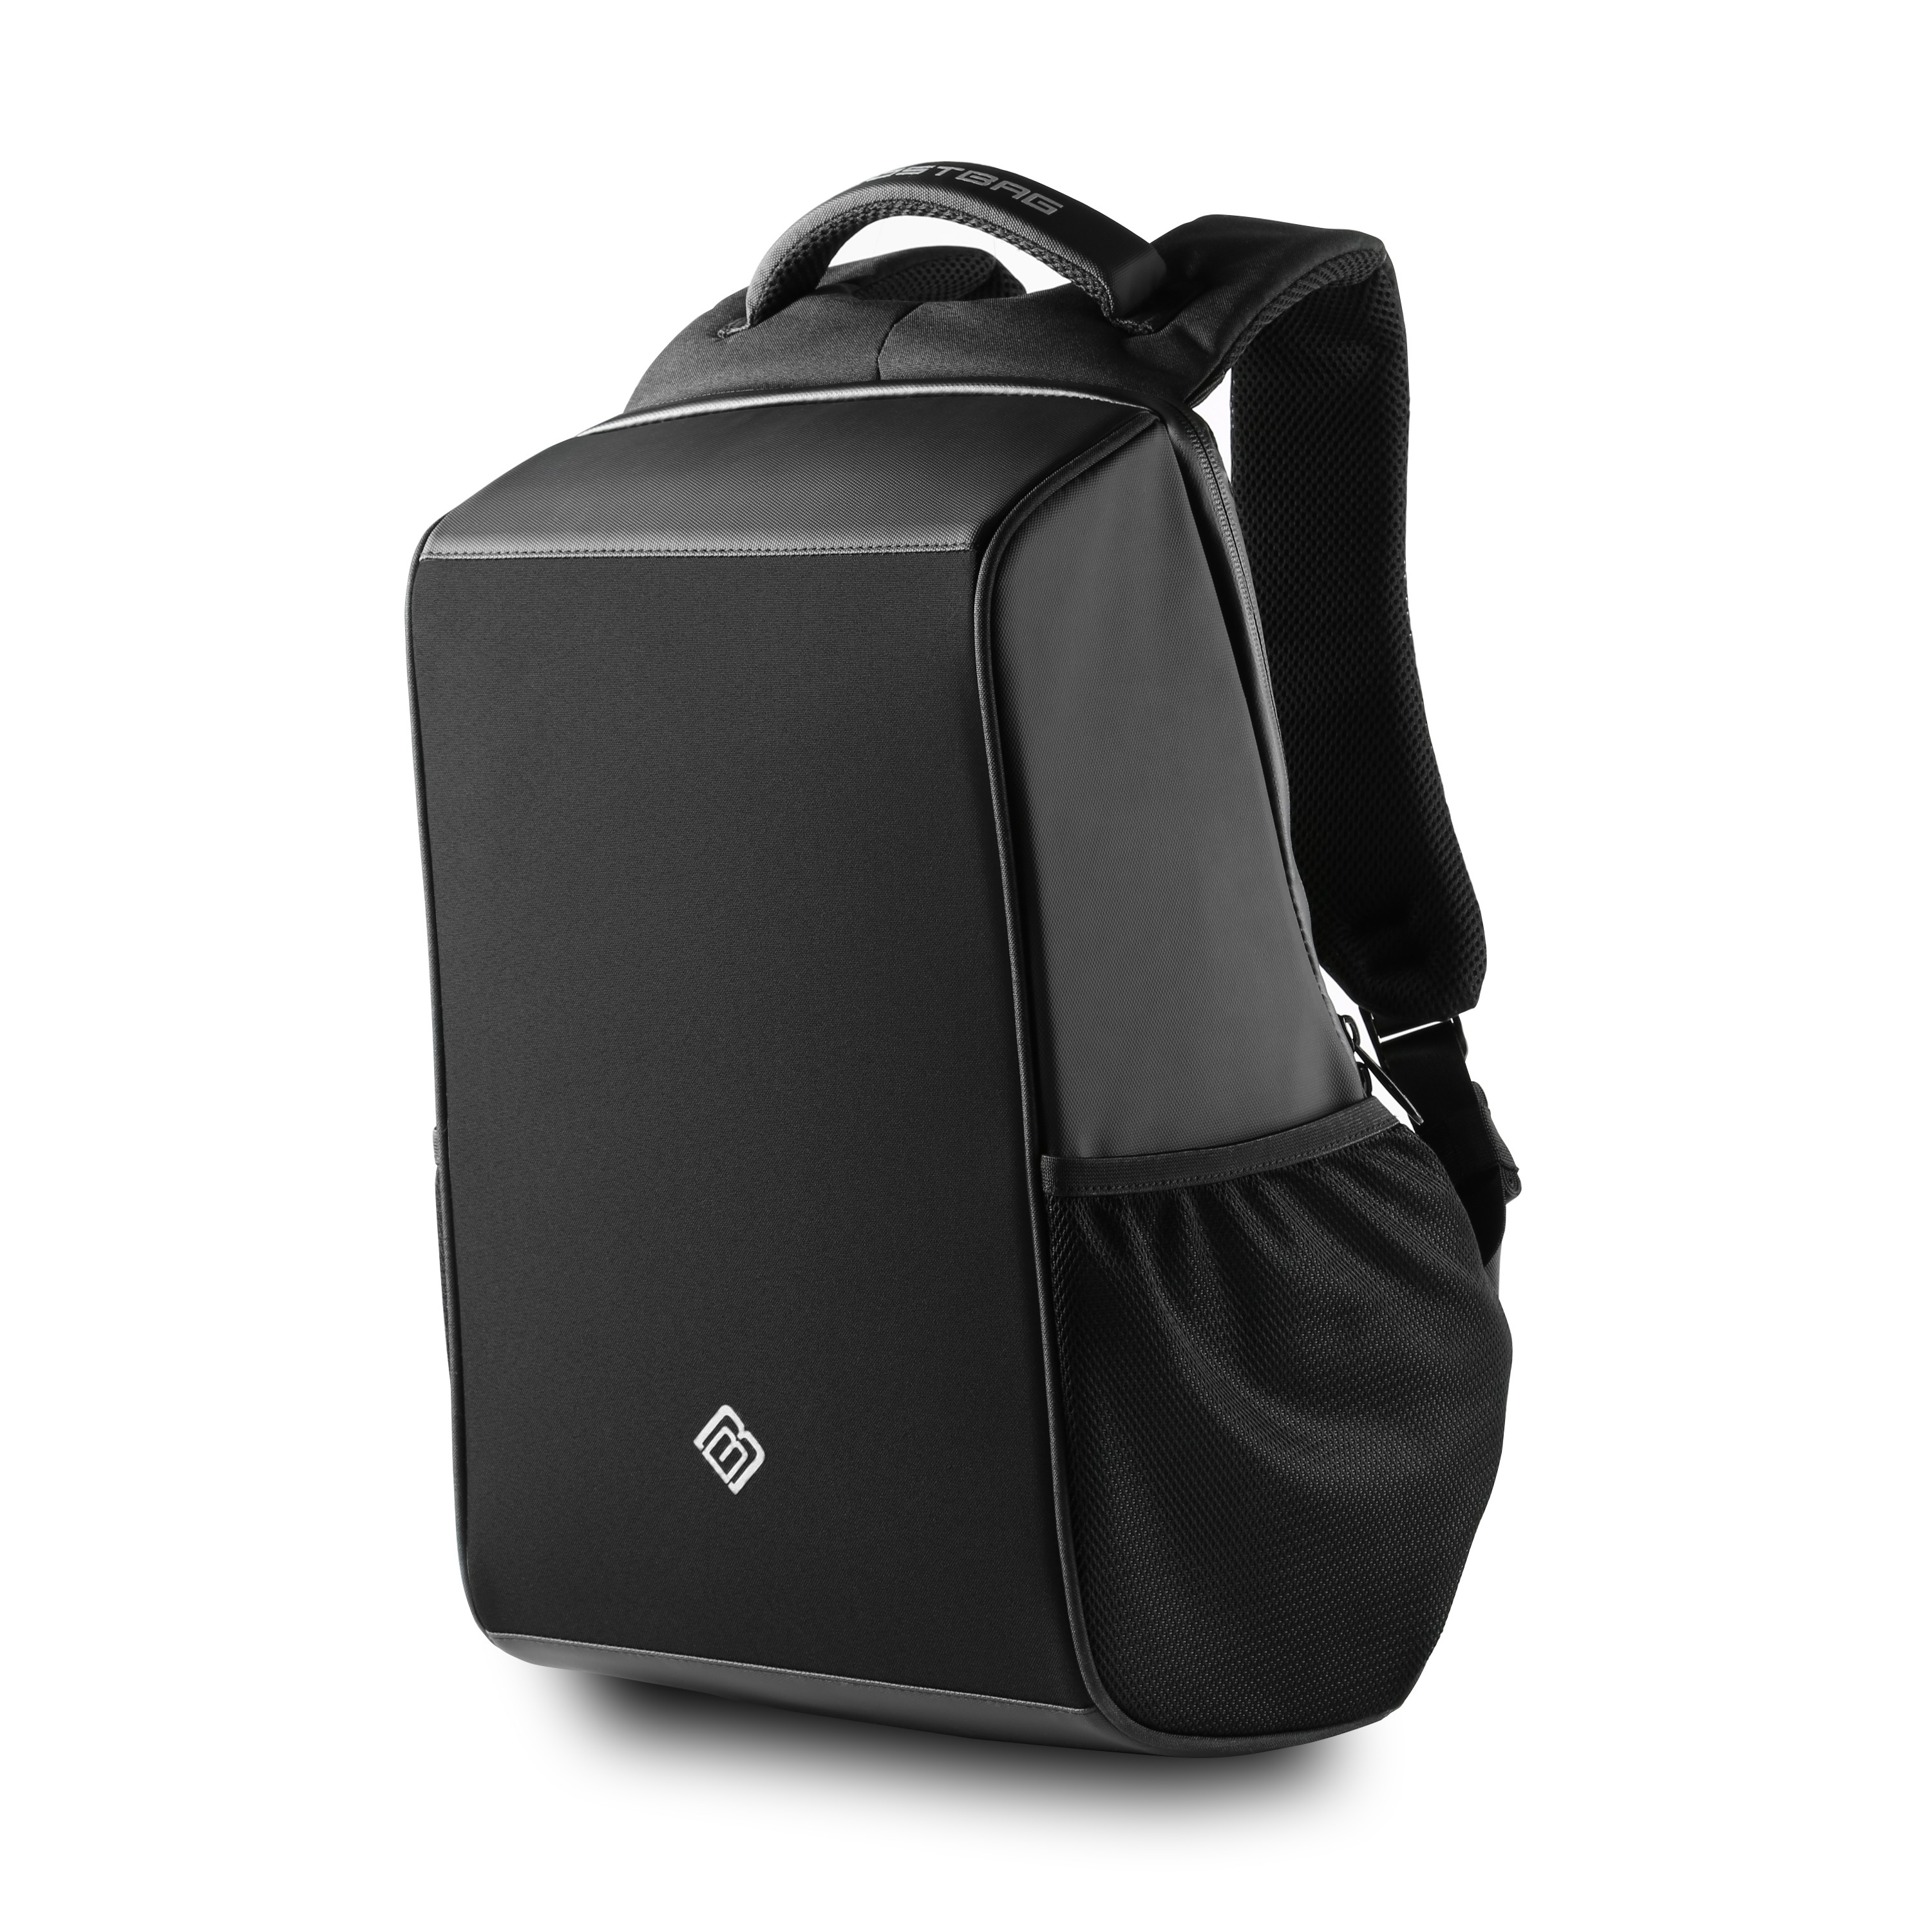 CSL Computer  BoostBoxx BoostBag Shadow - Notebook Backpack up to 15.6